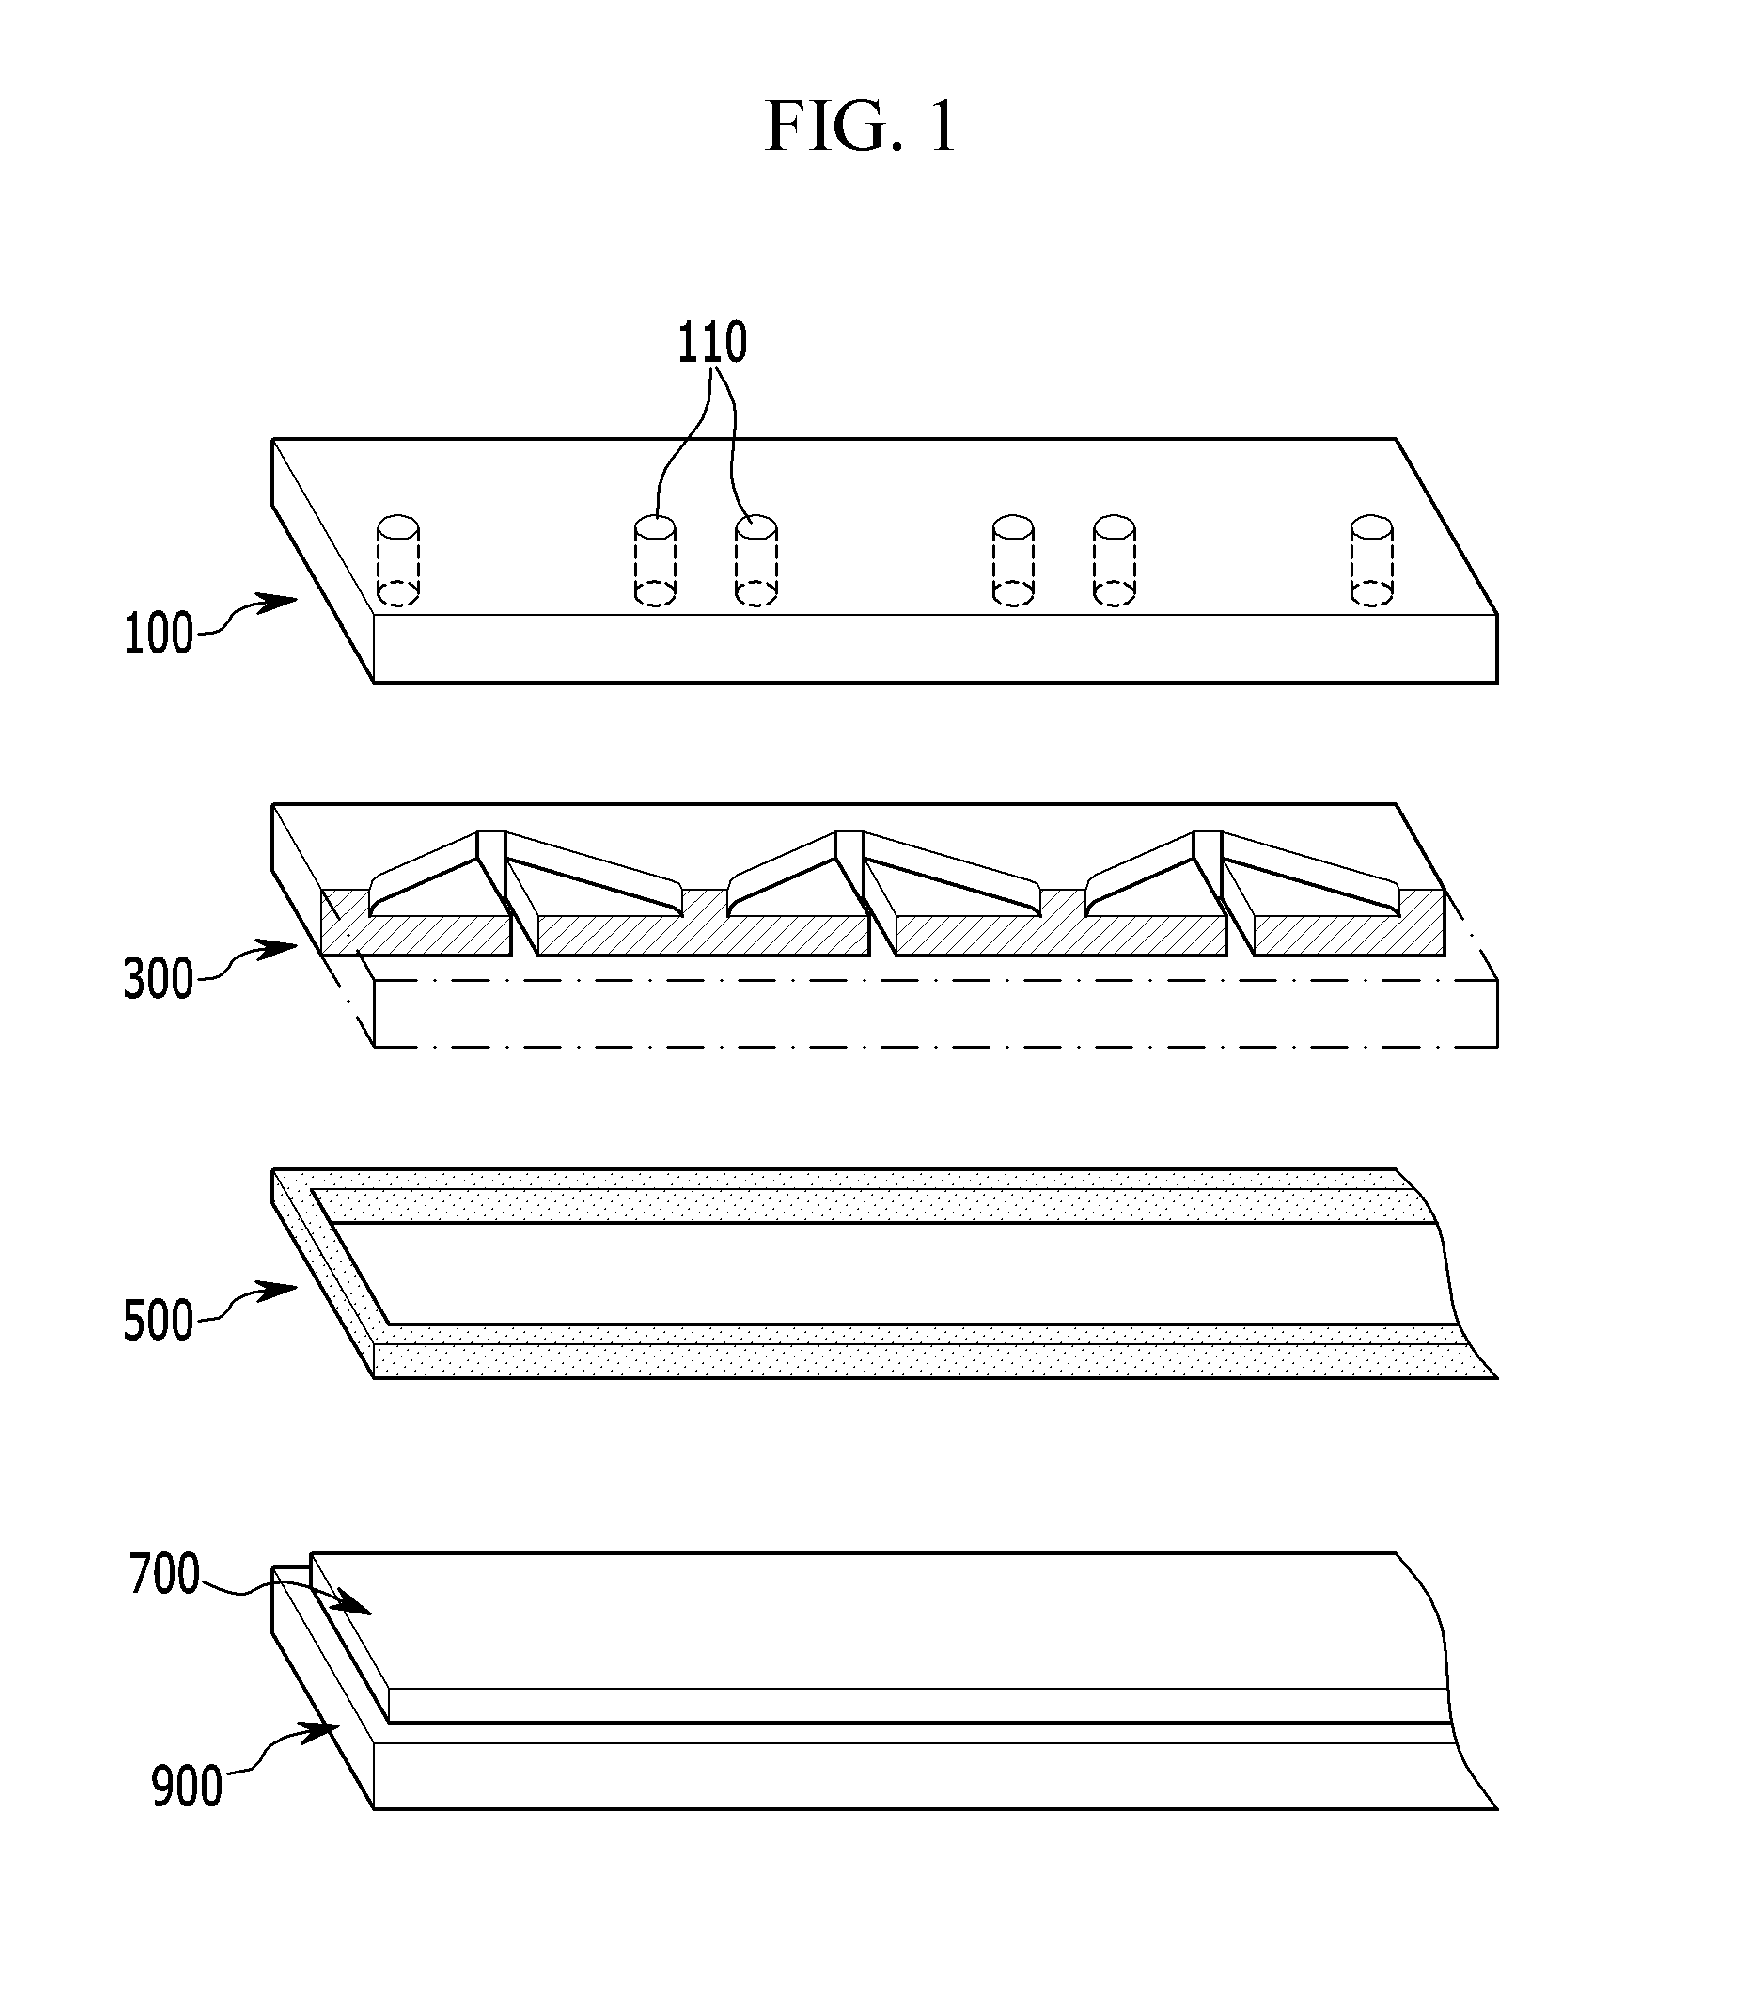 Atomic layer deposition apparatus and method of atomic layer deposition using the same